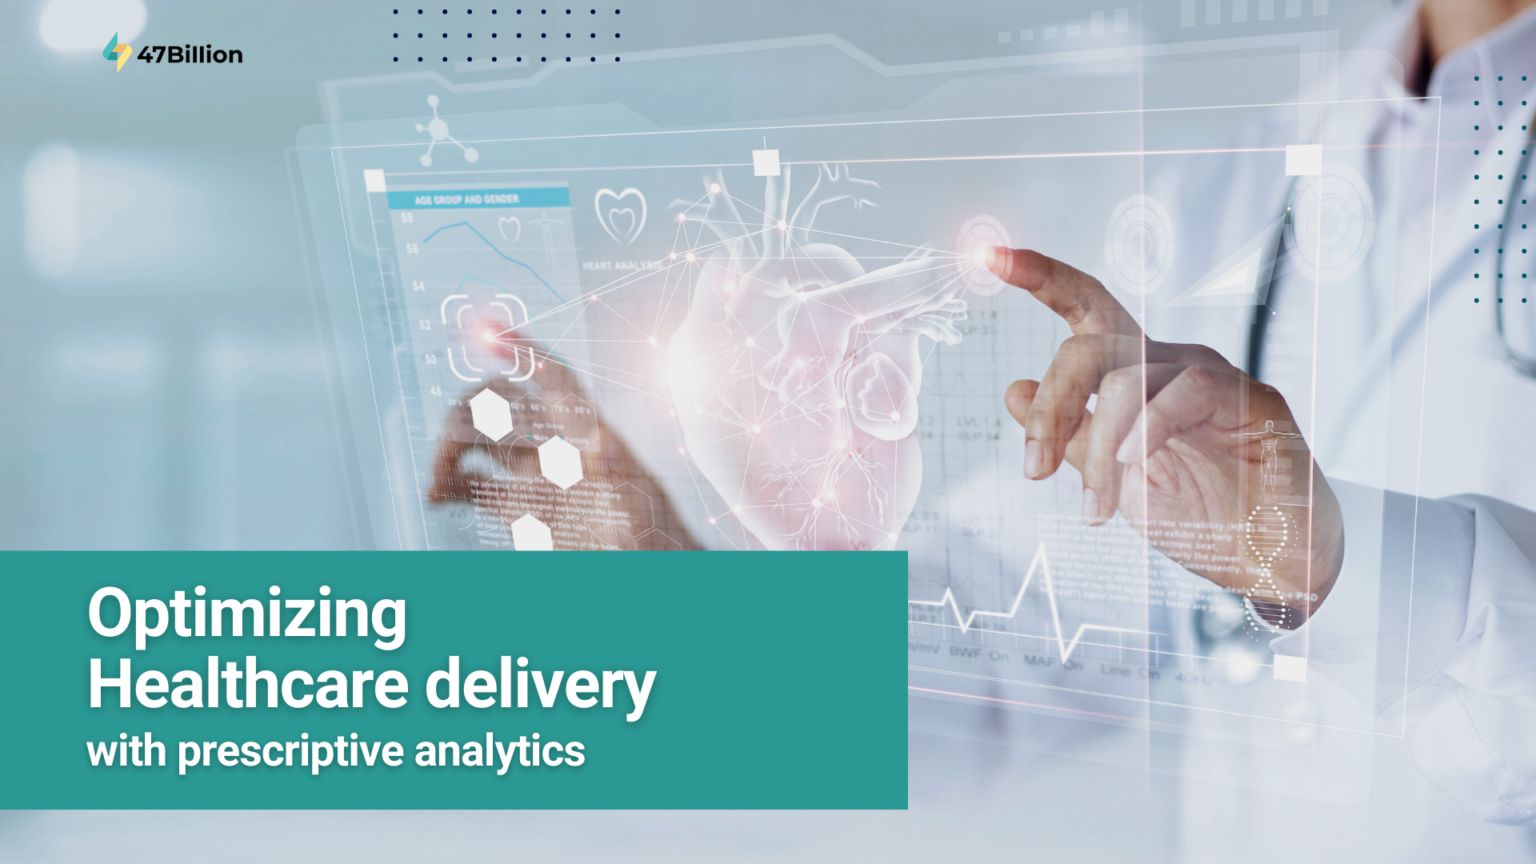 How to Successfully Use Prescriptive Analytics to Optimize Healthcare Delivery